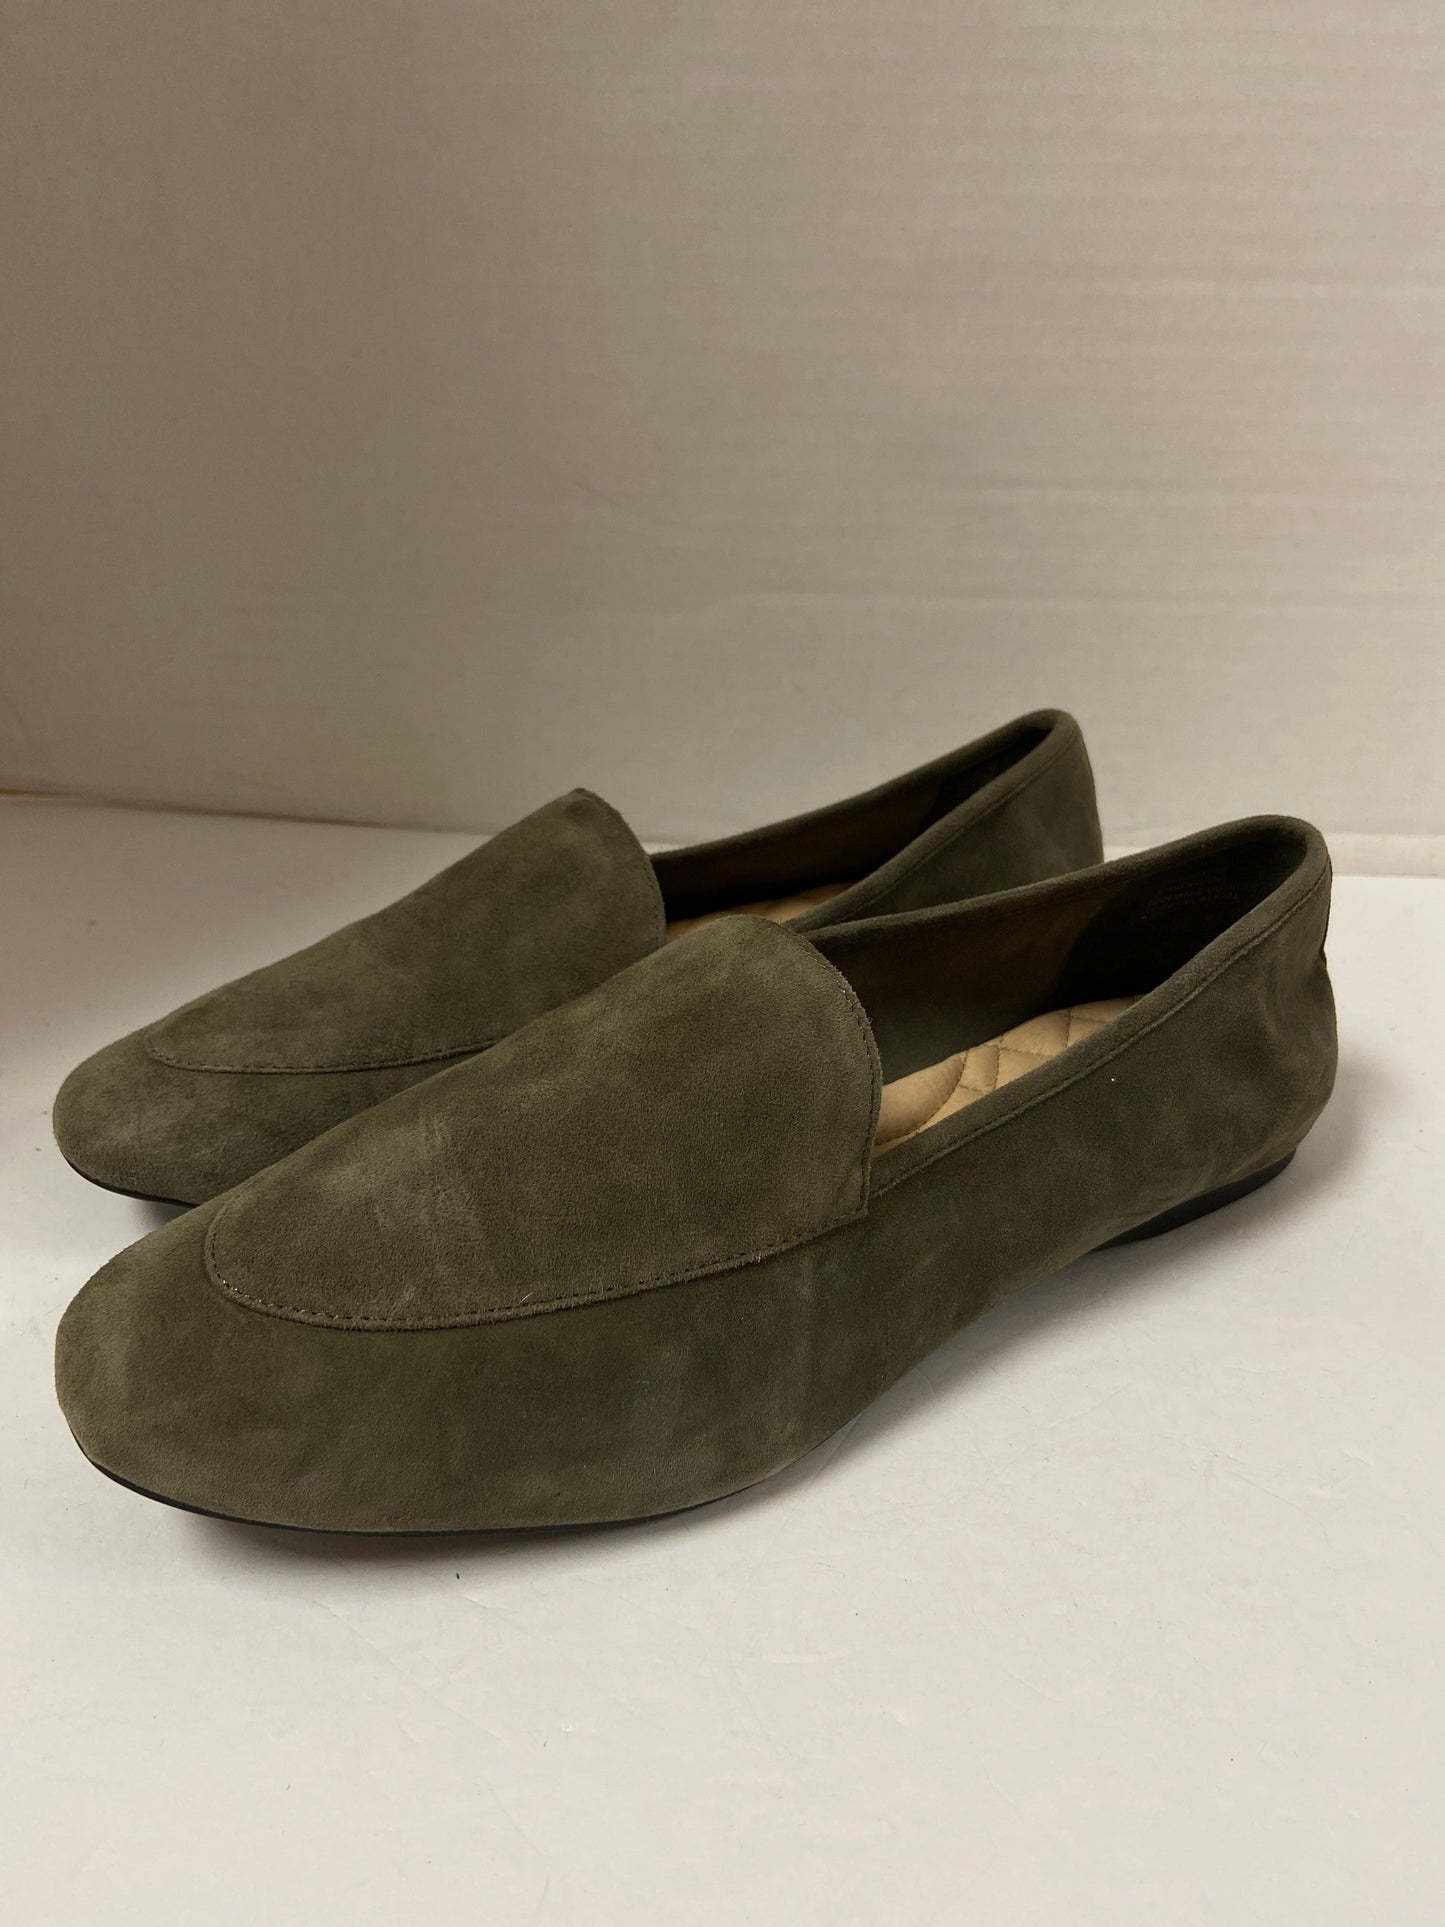 Shoes Flats Loafer Oxford By Clothes Mentor  Size: 9.5